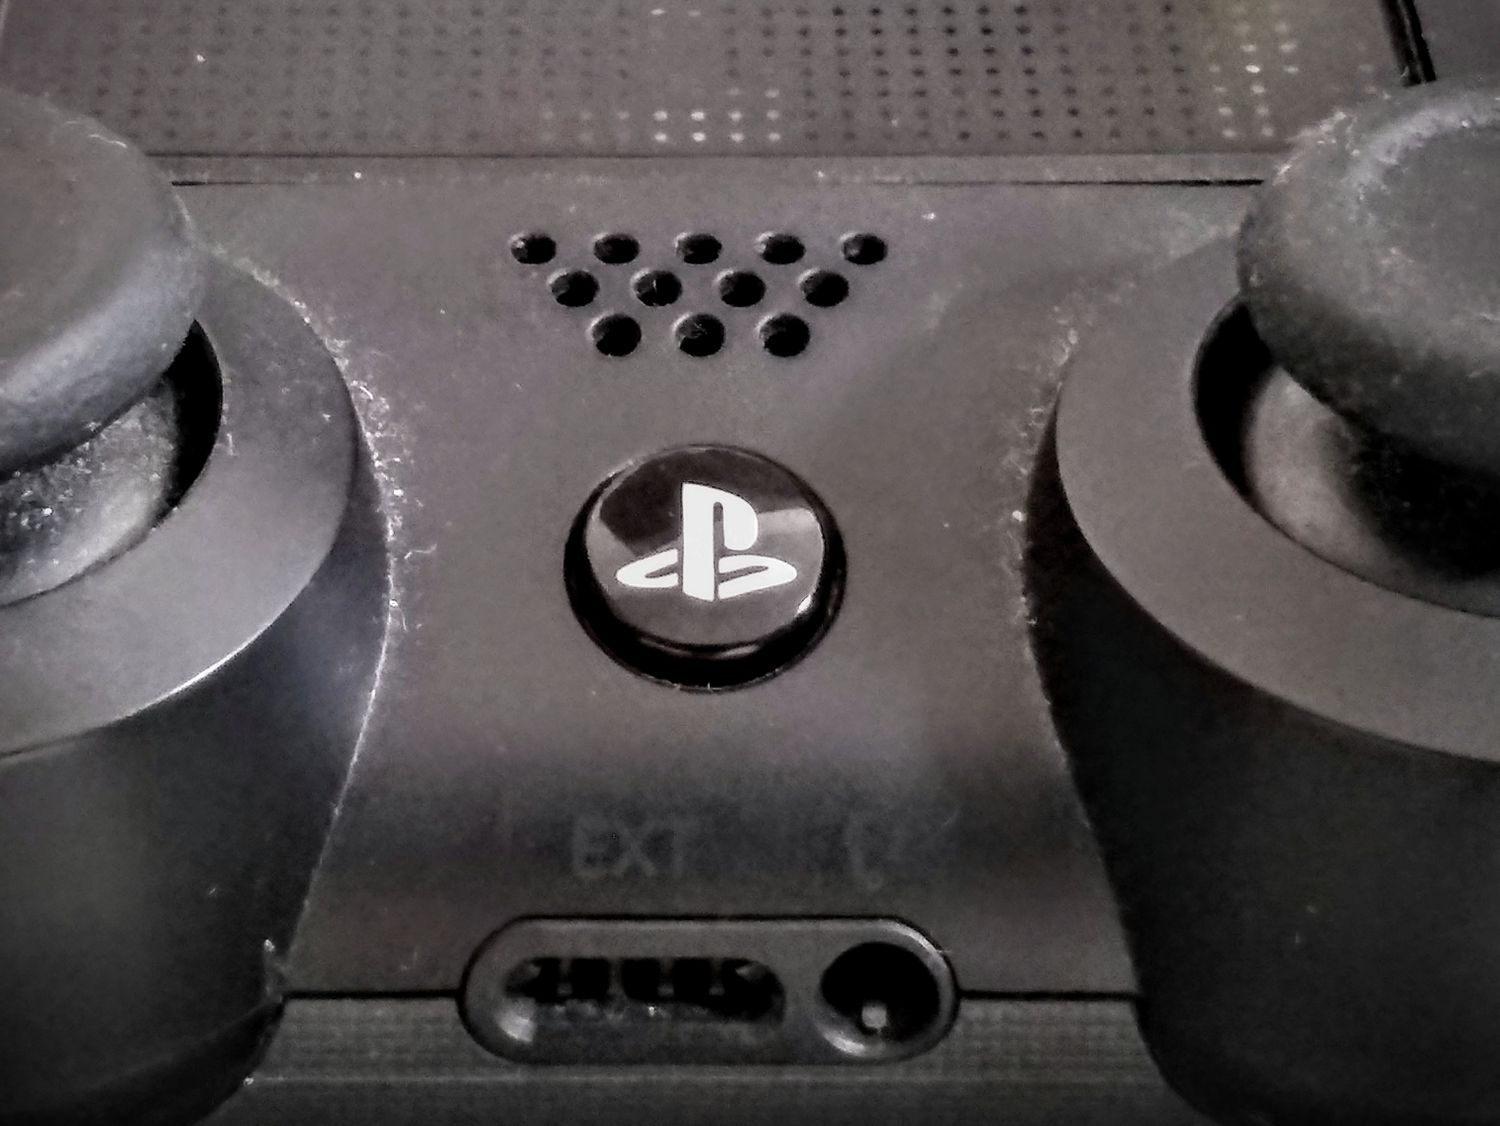 ps button